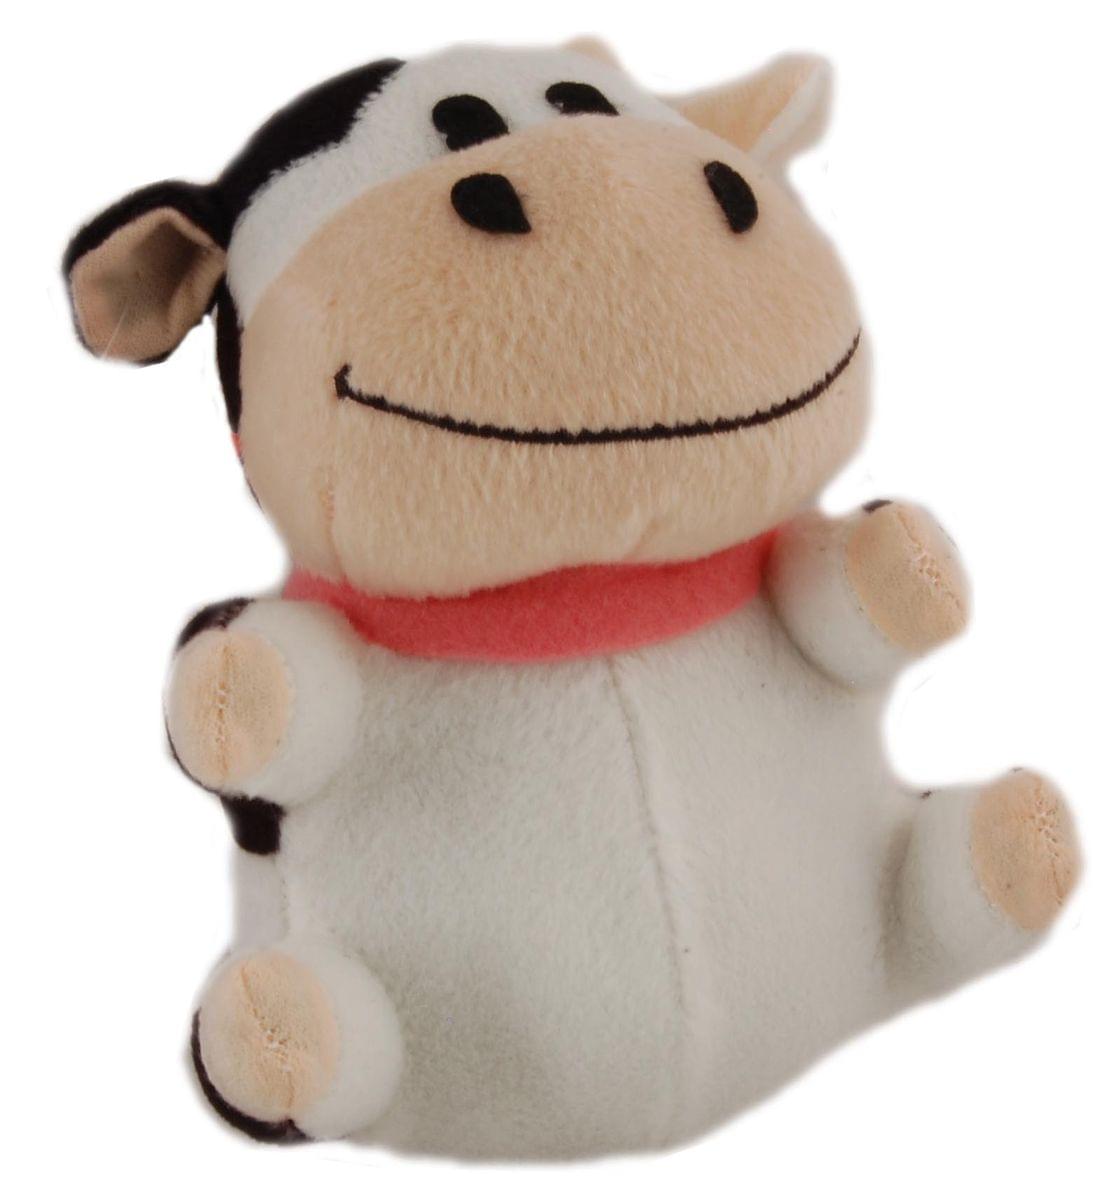 Harvest Moon Tree Of Tranquility 10th Anniversary 6.5 Plush: Cow